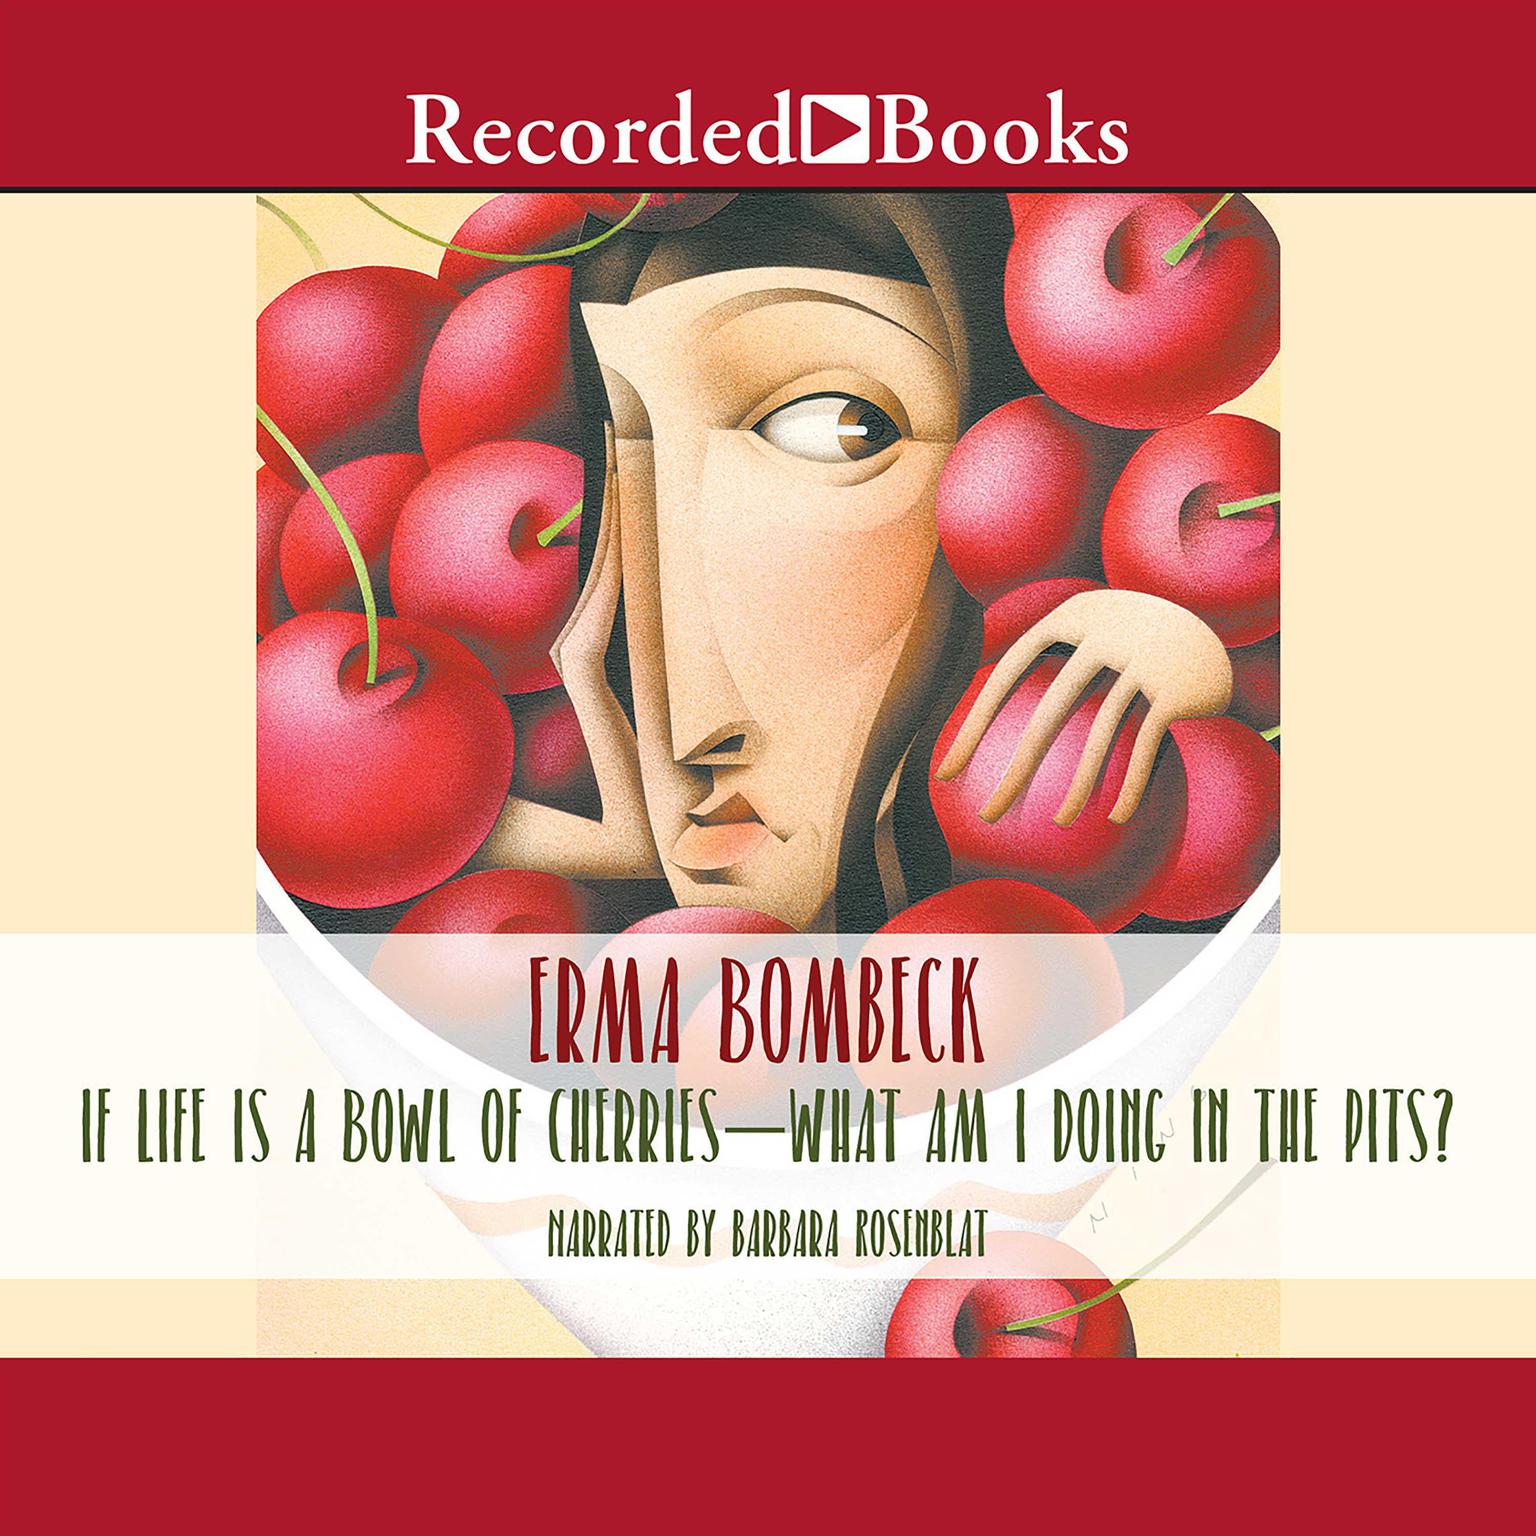 If Life is a Bowl of Cherries, What Am I Doing in the Pits? Audiobook, by Erma Bombeck